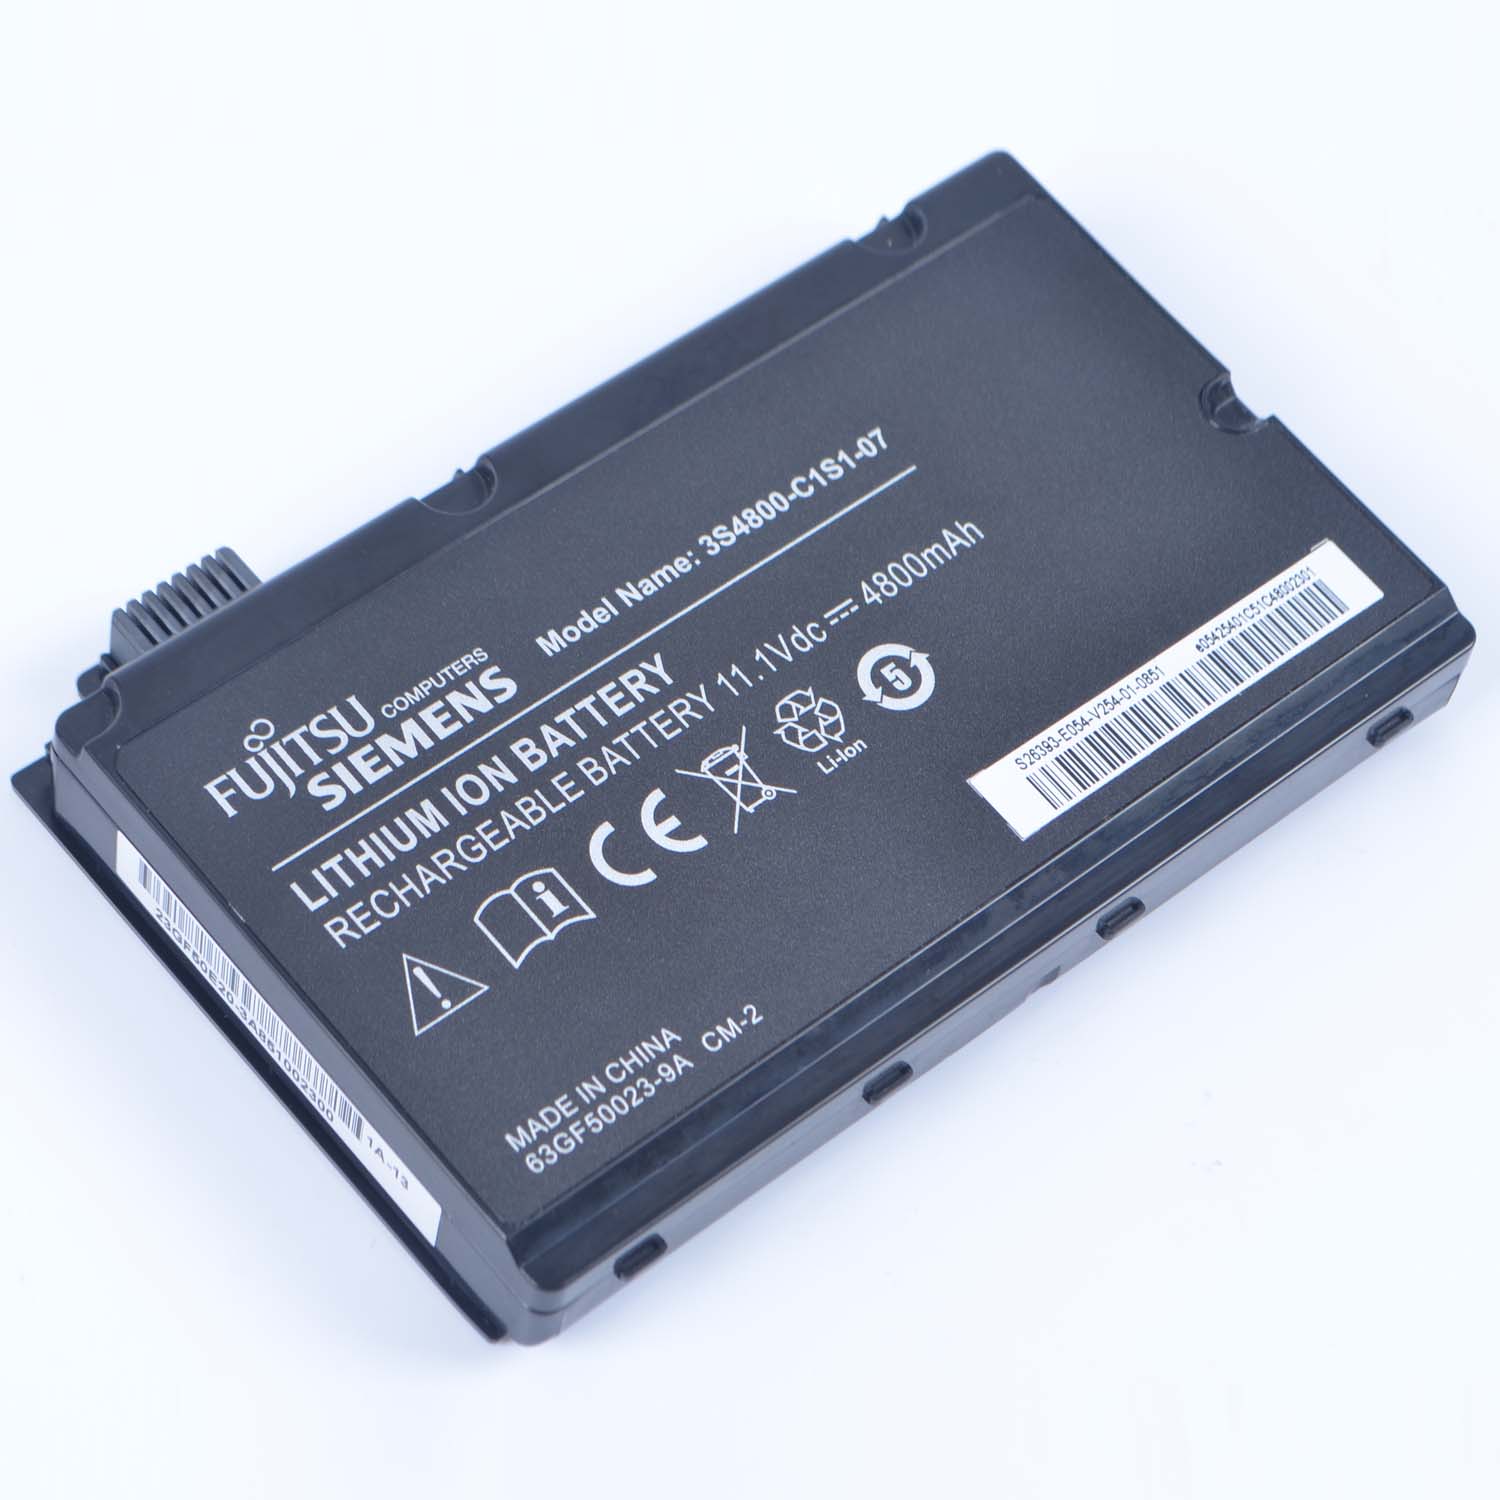 Replacement Battery for FUJITSU 3S3600-S1A1-07 battery